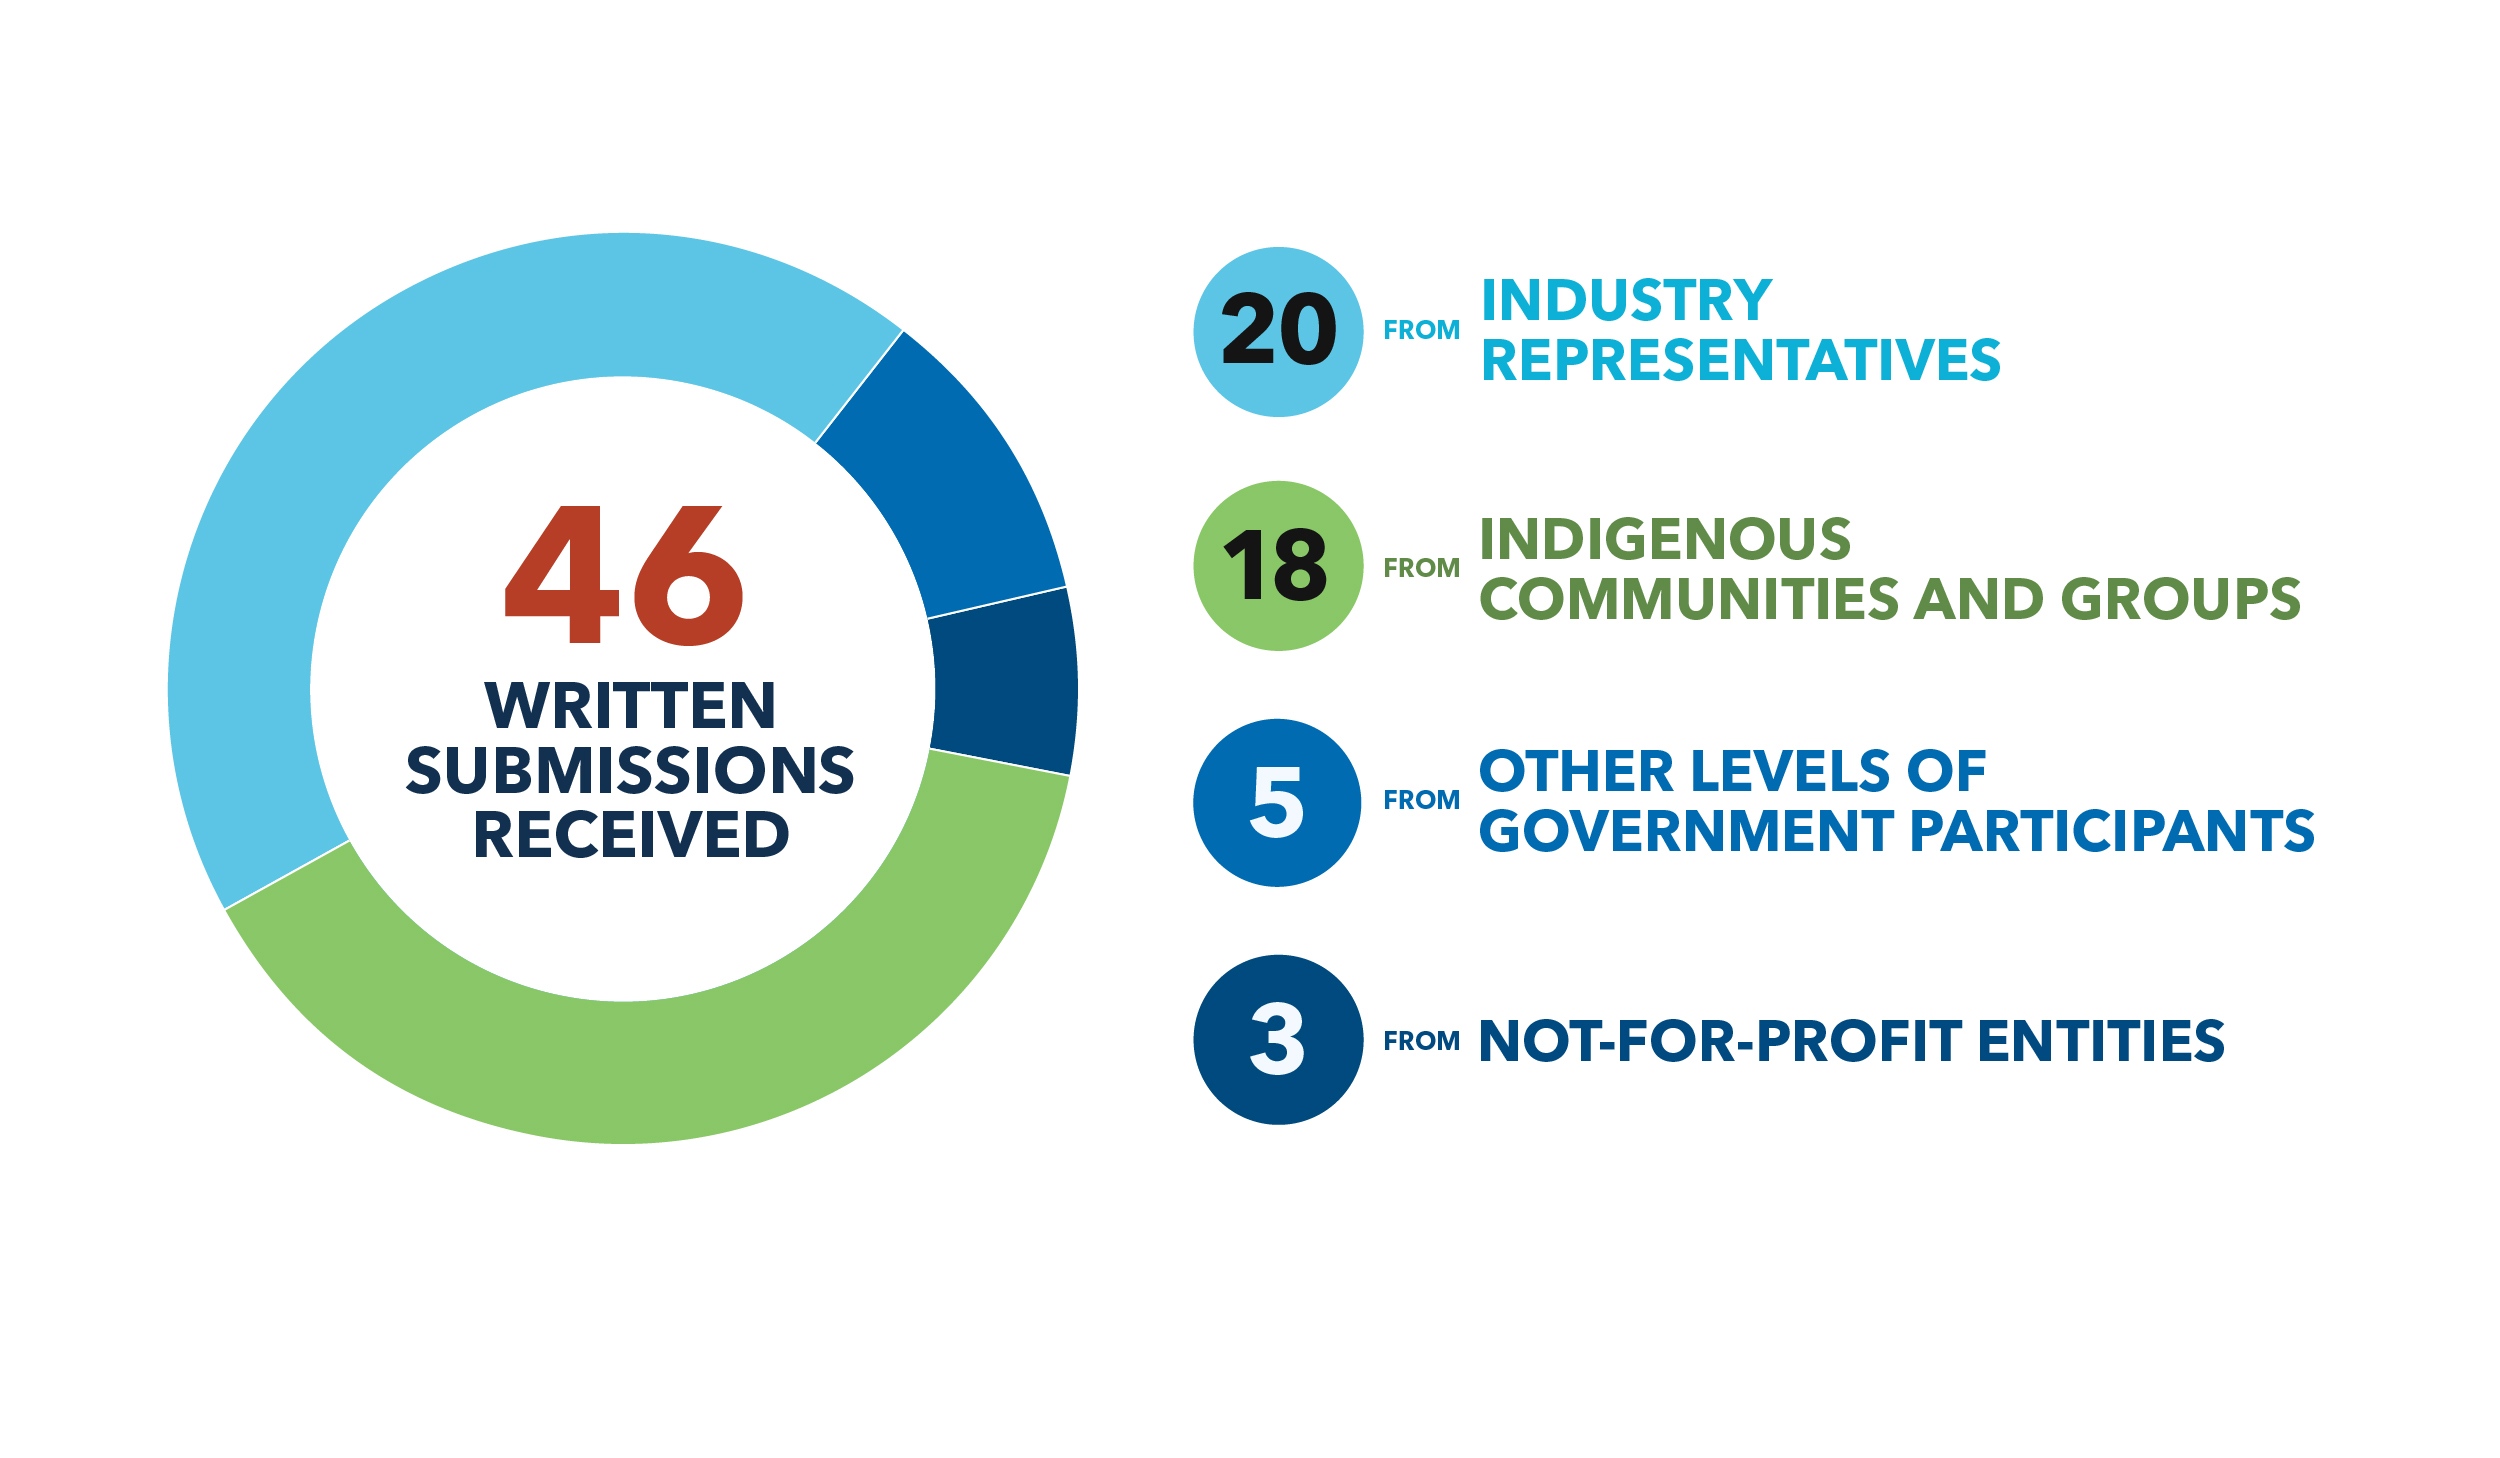 This is a pie chart showing the breakdown of the 46 submissions. There were 20 from industry representatives, 18 from Indigenous communities and groups, 5 from other levels of government, and 3 from not-for-profit entities